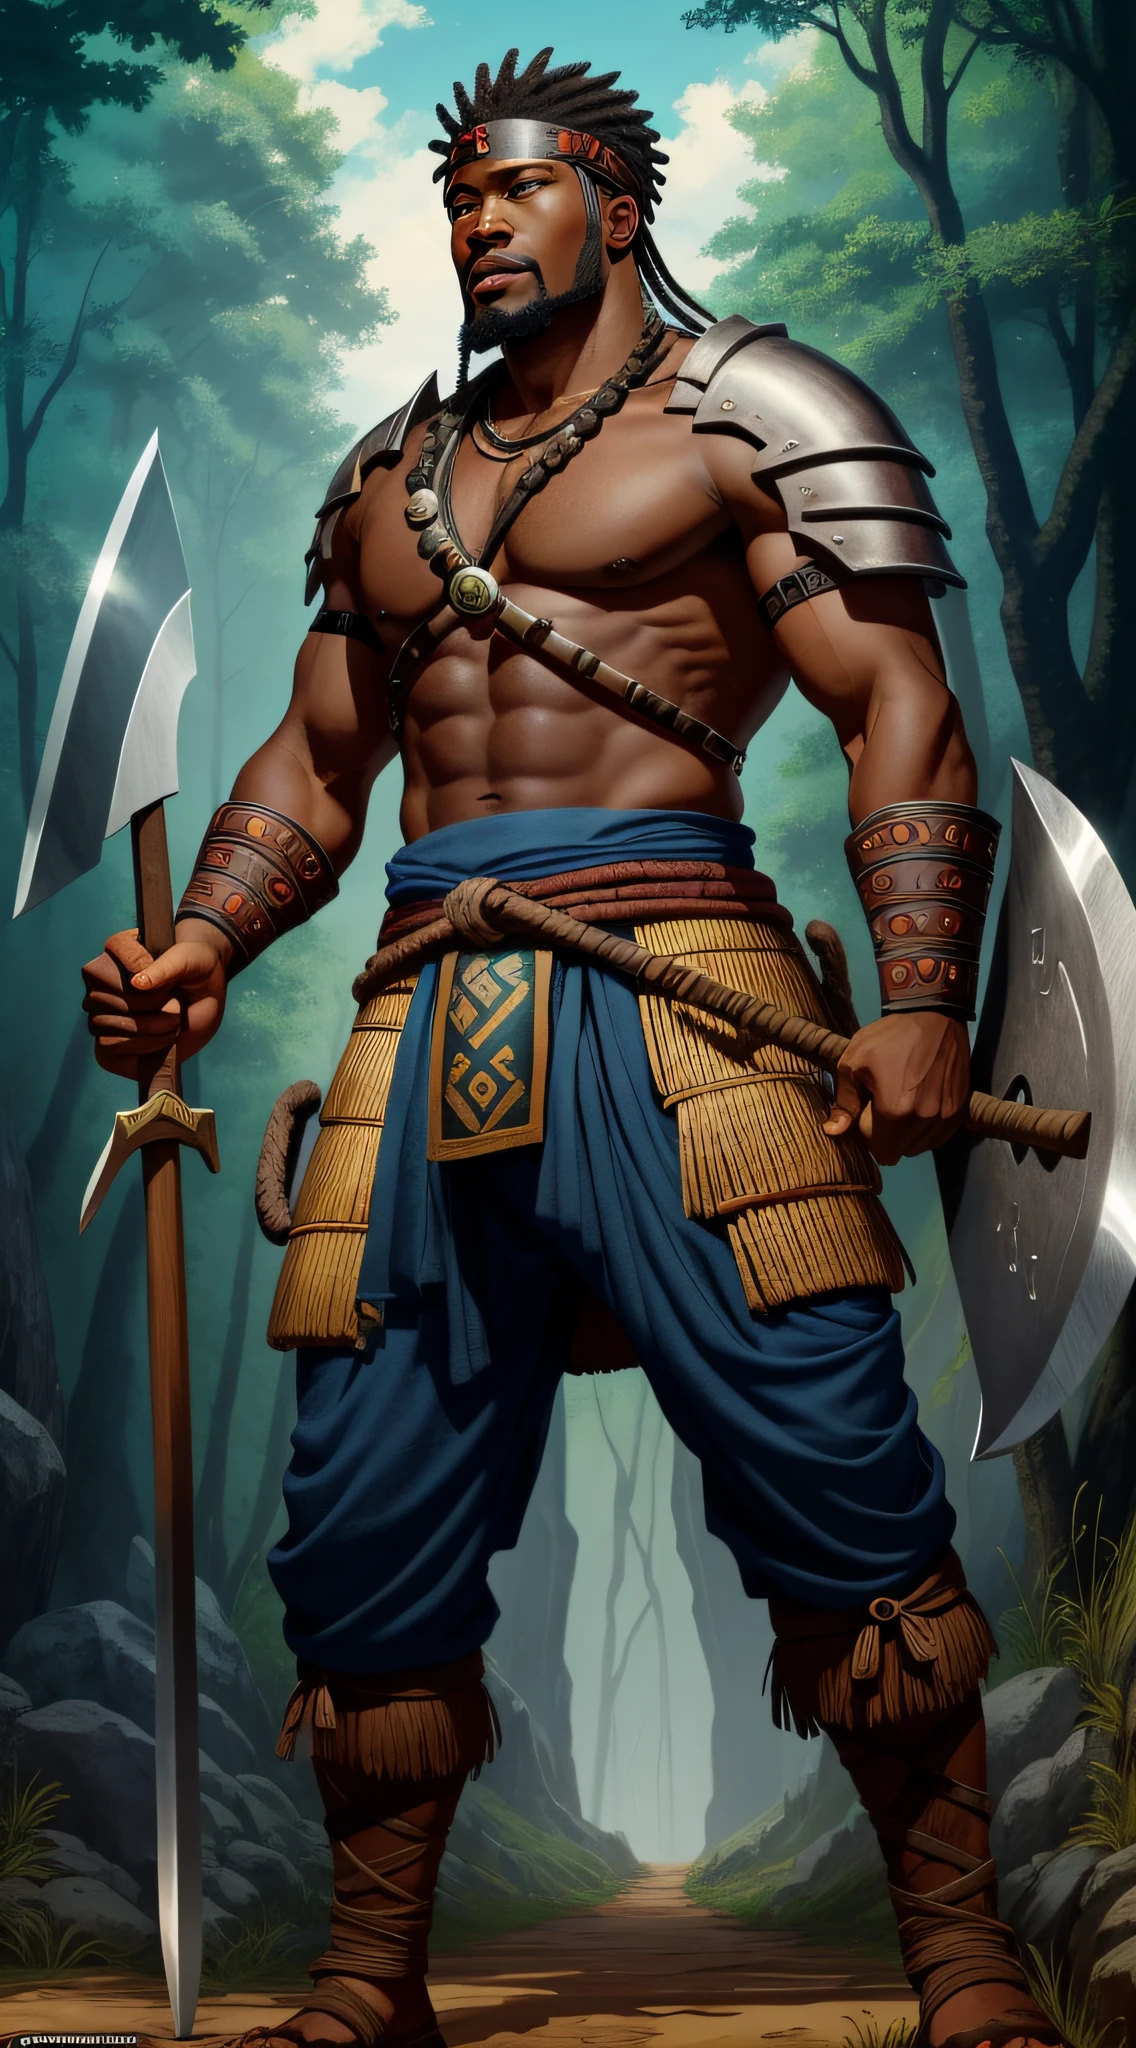 The Warrior and Blacksmith: Ogun is often represented as a strong and courageous warrior. He is also associated with metallurgy and forging, being called "Ogun Beira-Mar" or "Ogun das Tools".

Lord of the Roads: Ogun is considered the lord of roads and paths. He is invoked to clear paths, remove obstacles, and protect travelers.

Color and Symbols: Ogun is usually associated with the color green or dark blue. His symbols include a sword, an axe, a spear and an anvil, reflecting his warrior nature and skill as a blacksmith.